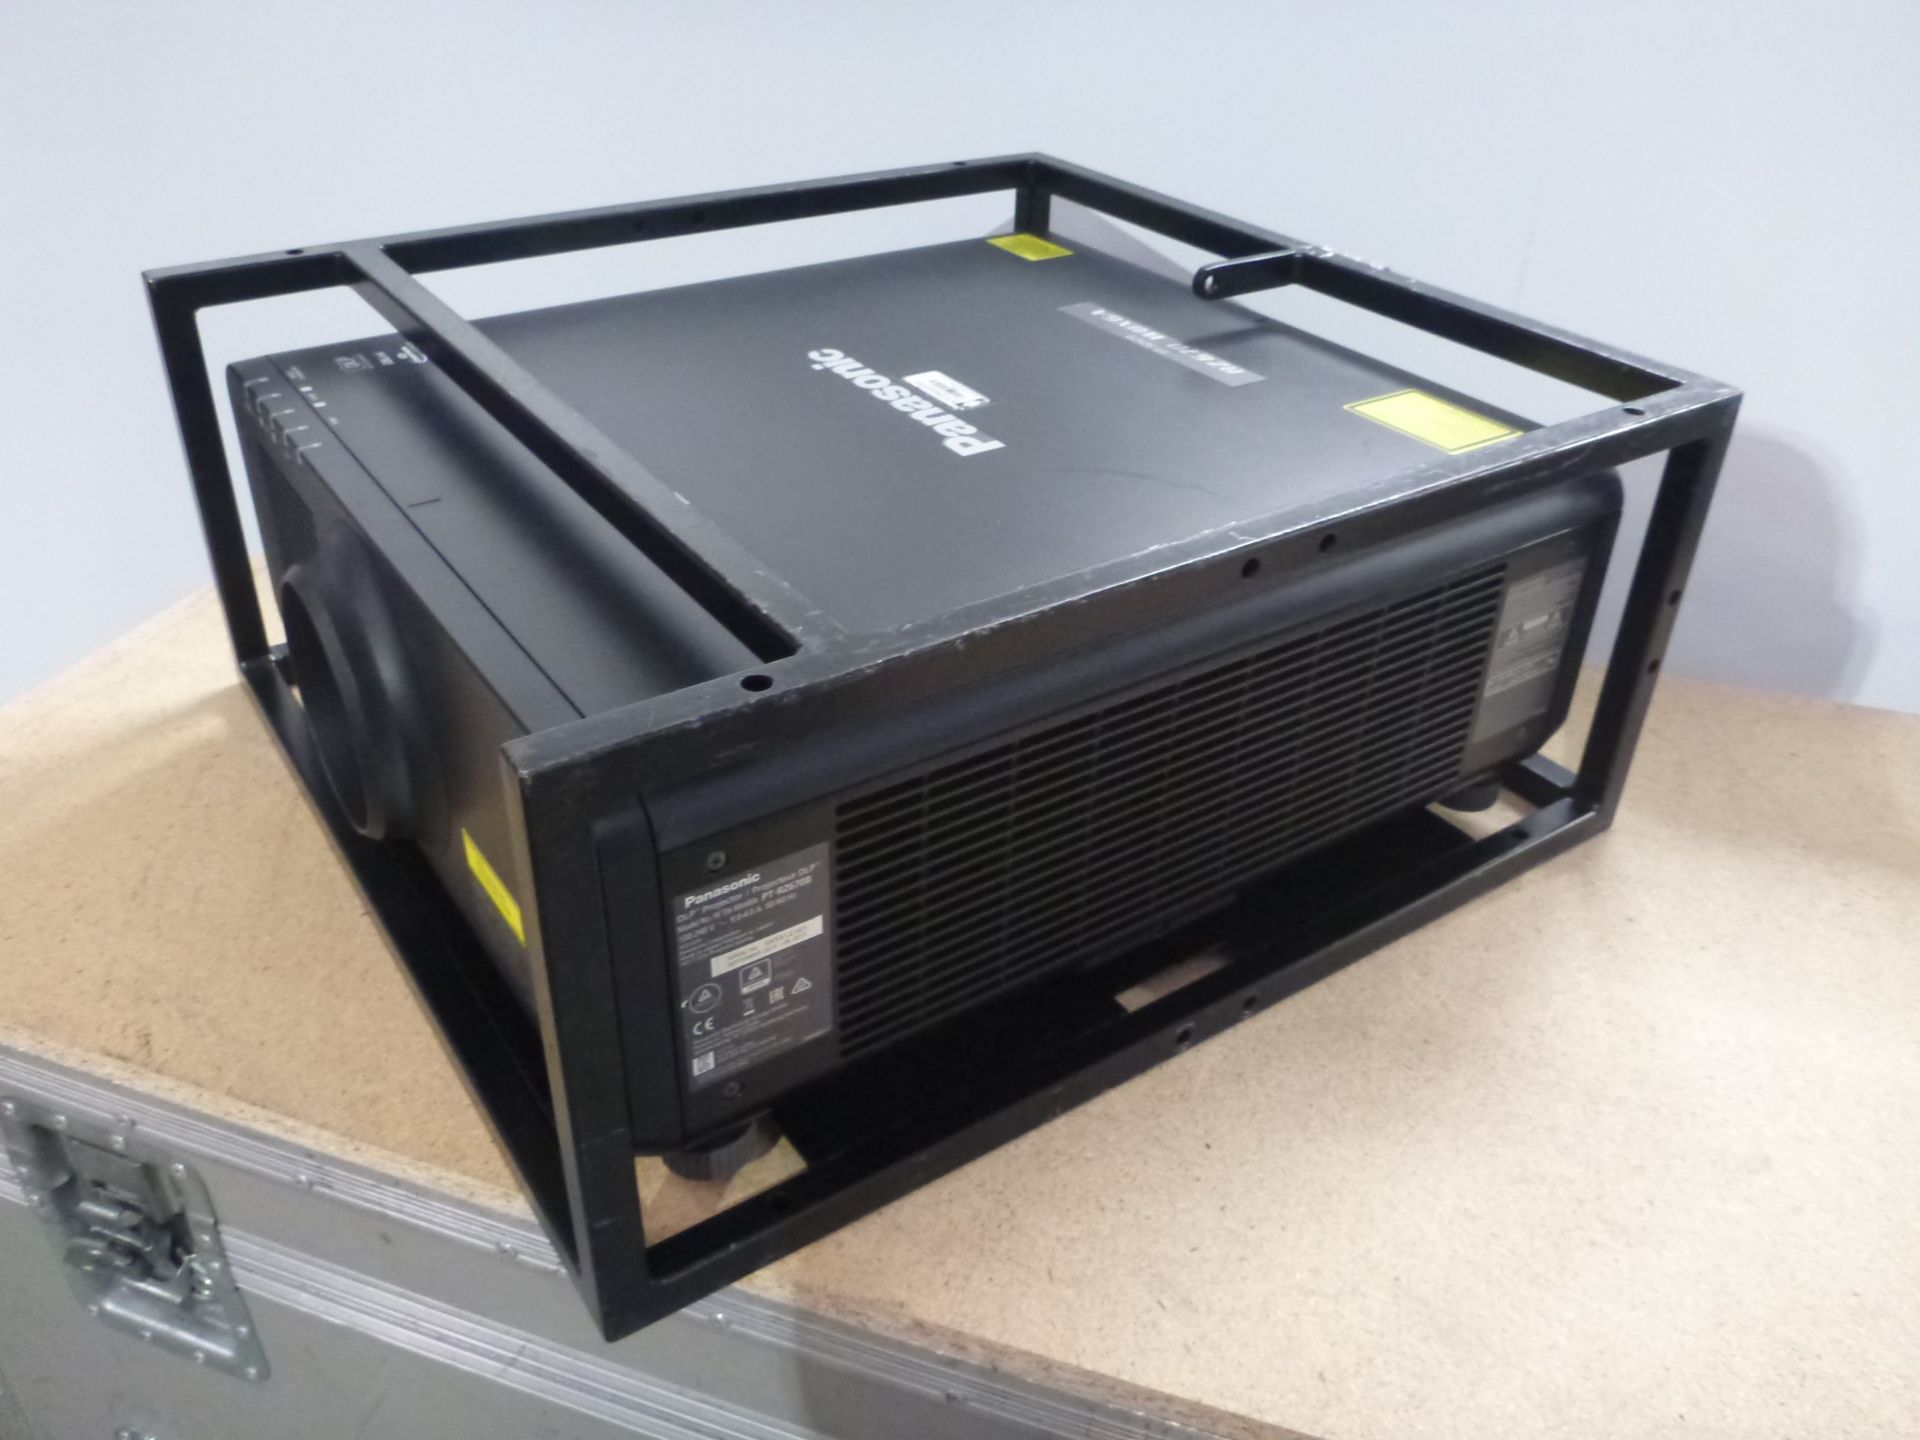 Panasonic Laser Projector, Model PT-RZ670, S/N SH5512101, YOM 2015, In flight case with standard 1. - Image 2 of 12